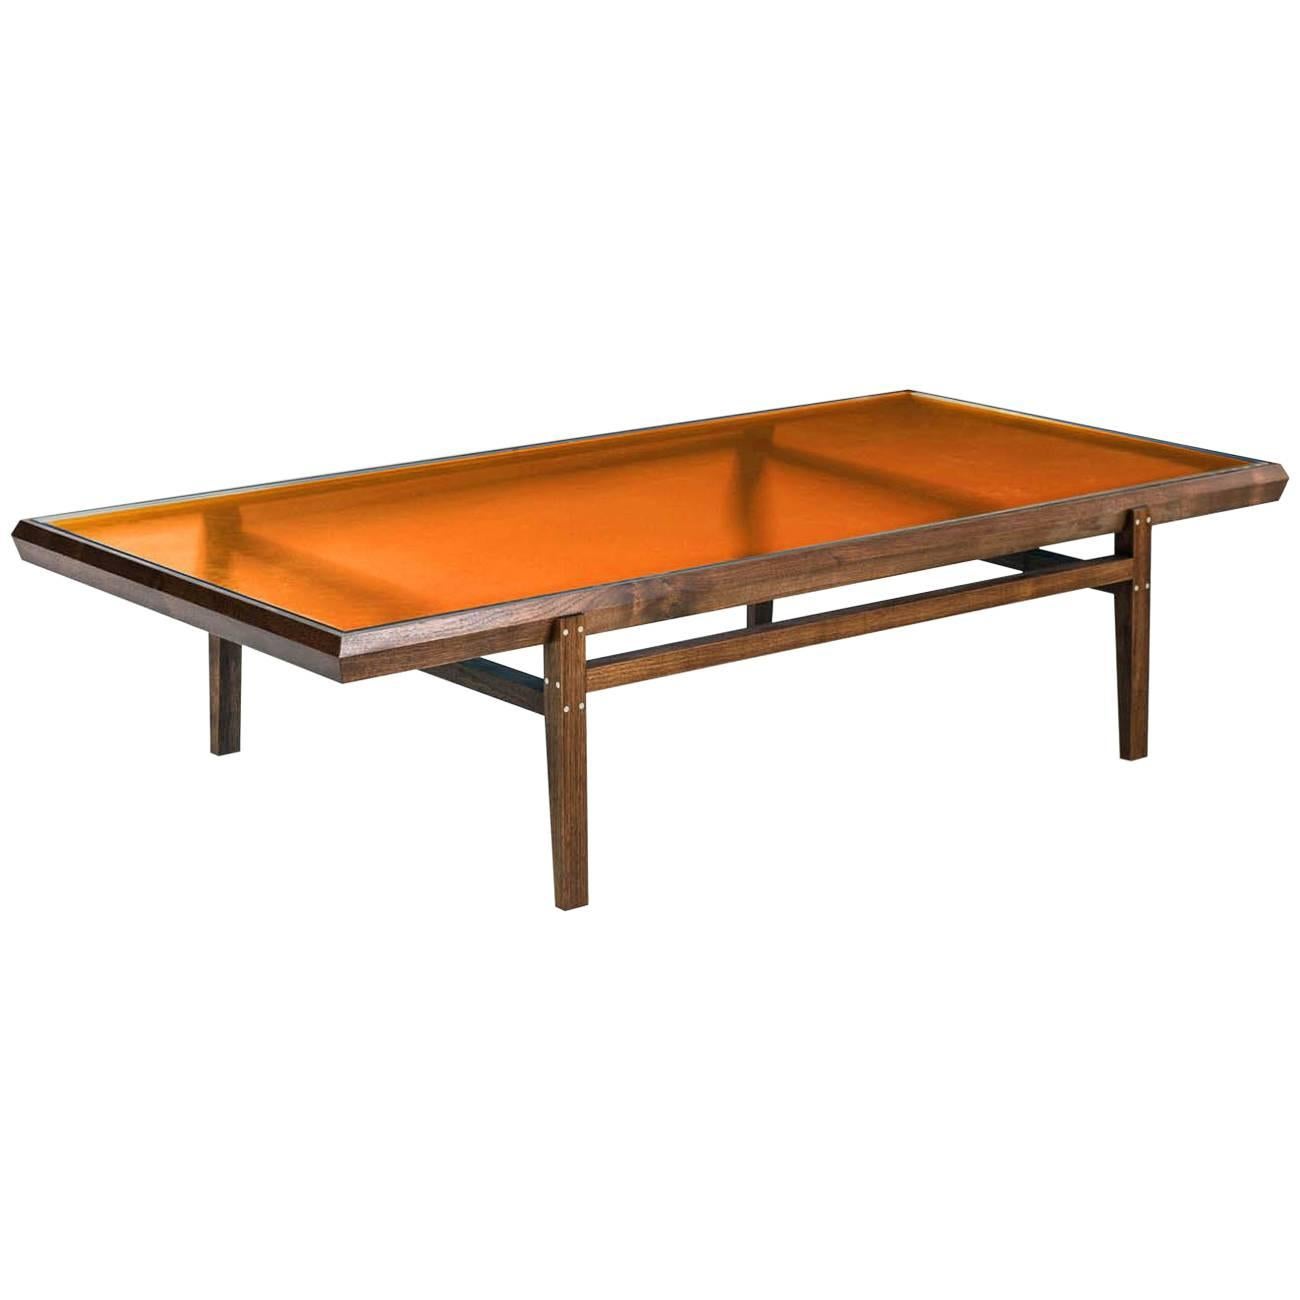 Pintor Coffee Table, Walnut Frame with Stainless Steel Inlay, Orange Glass Top For Sale